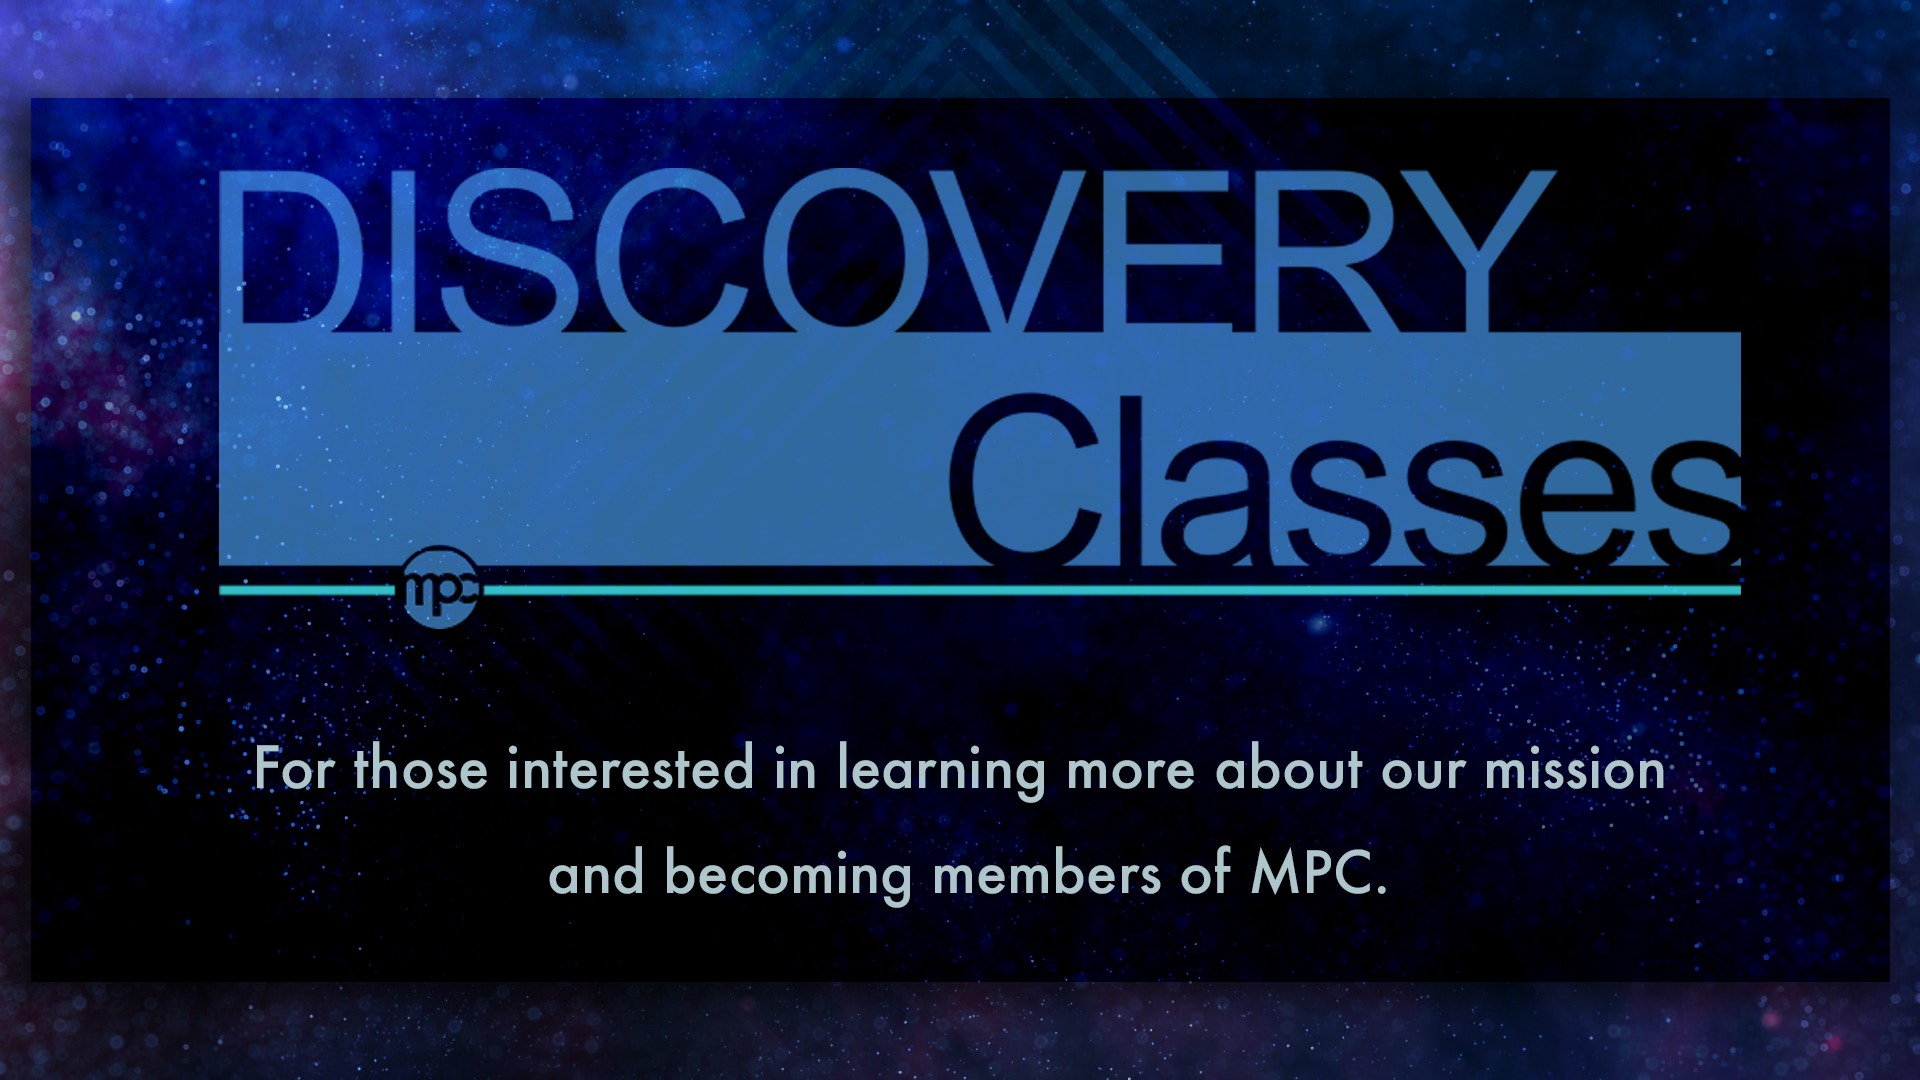 Join MPC: Discovery Class

Our Discovery class is for those interested in learning more about our mission and becoming members at MPC.
